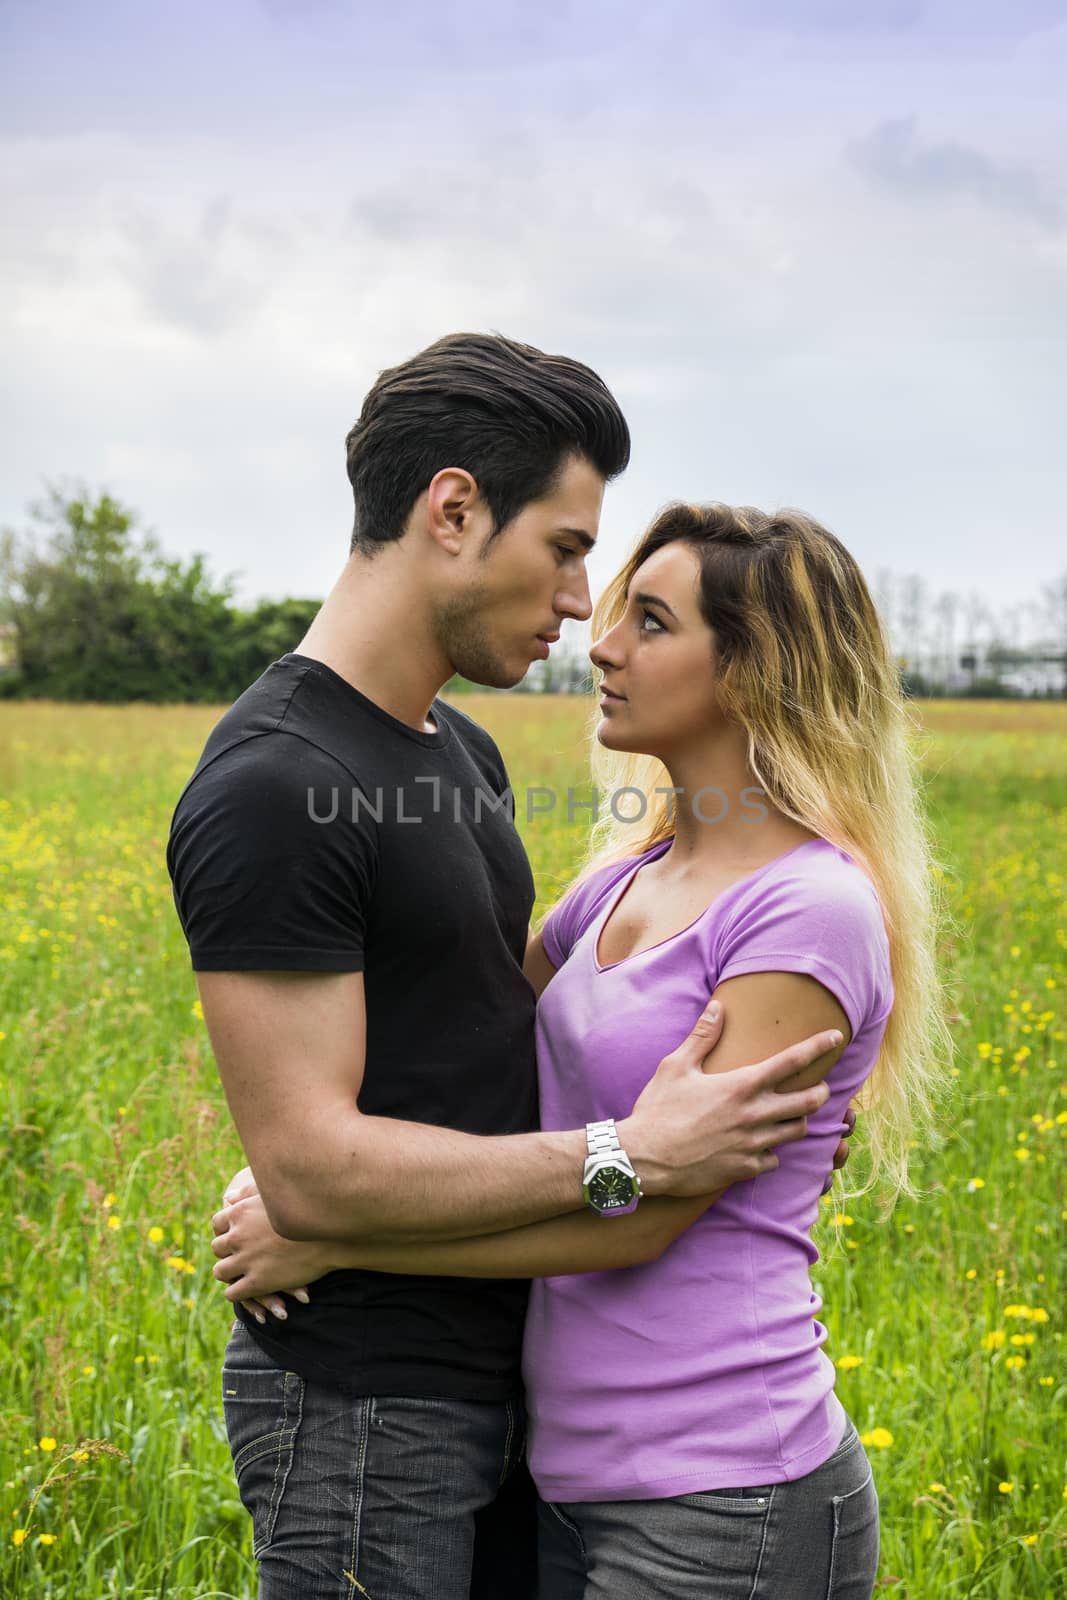 Boyfriend and girlfriend standing in countryside in green luscious field, embracing each other and cuddling, showing romantic love